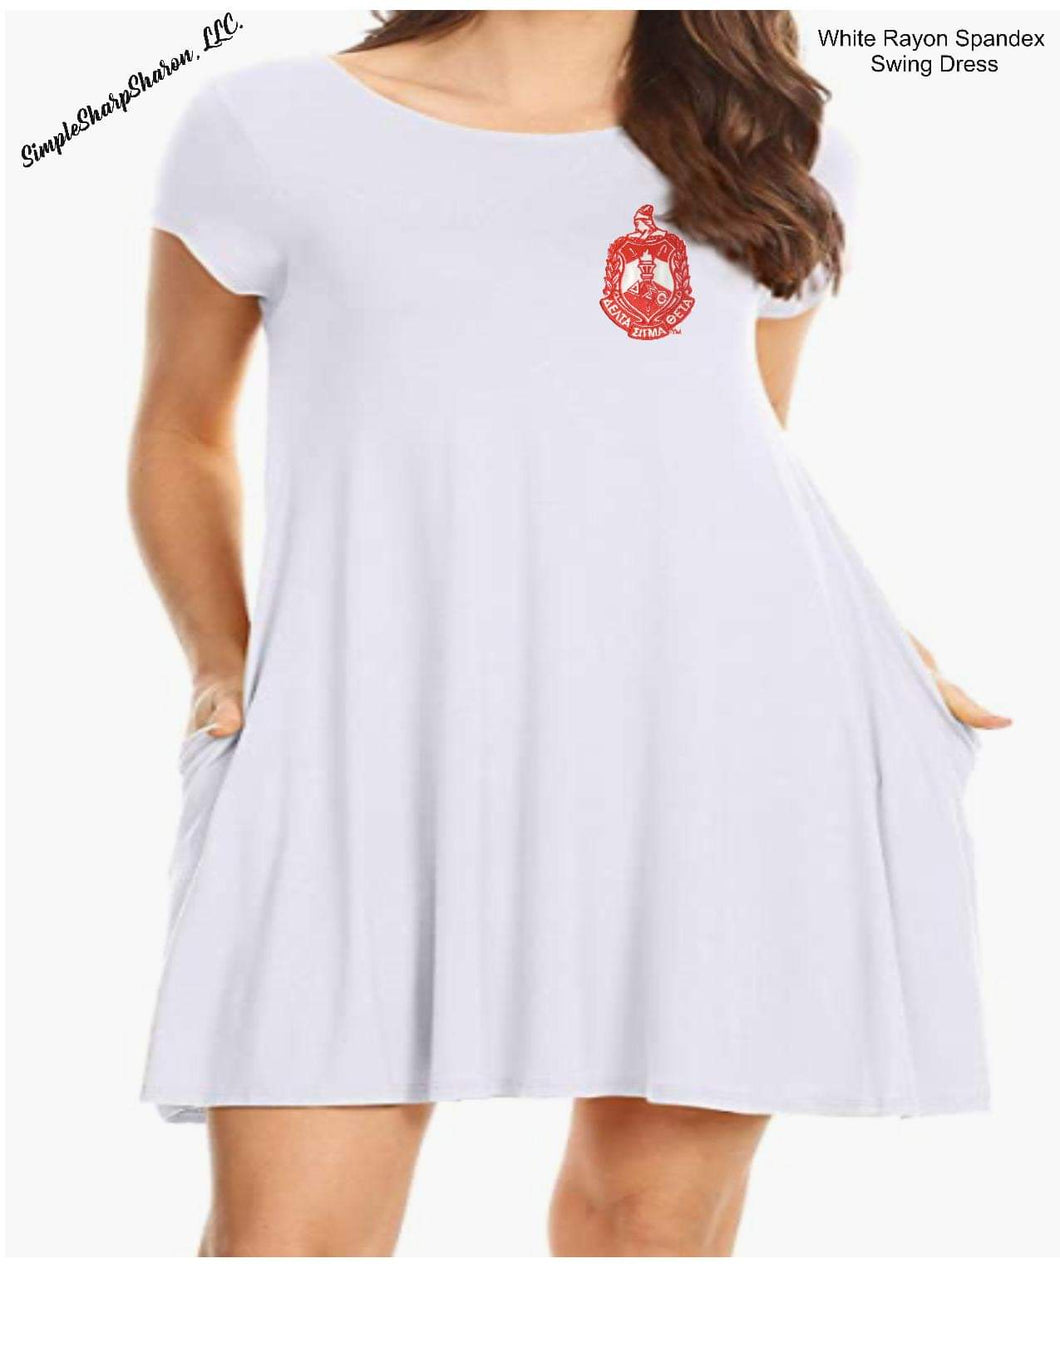 White Swing Dress with DST Shield